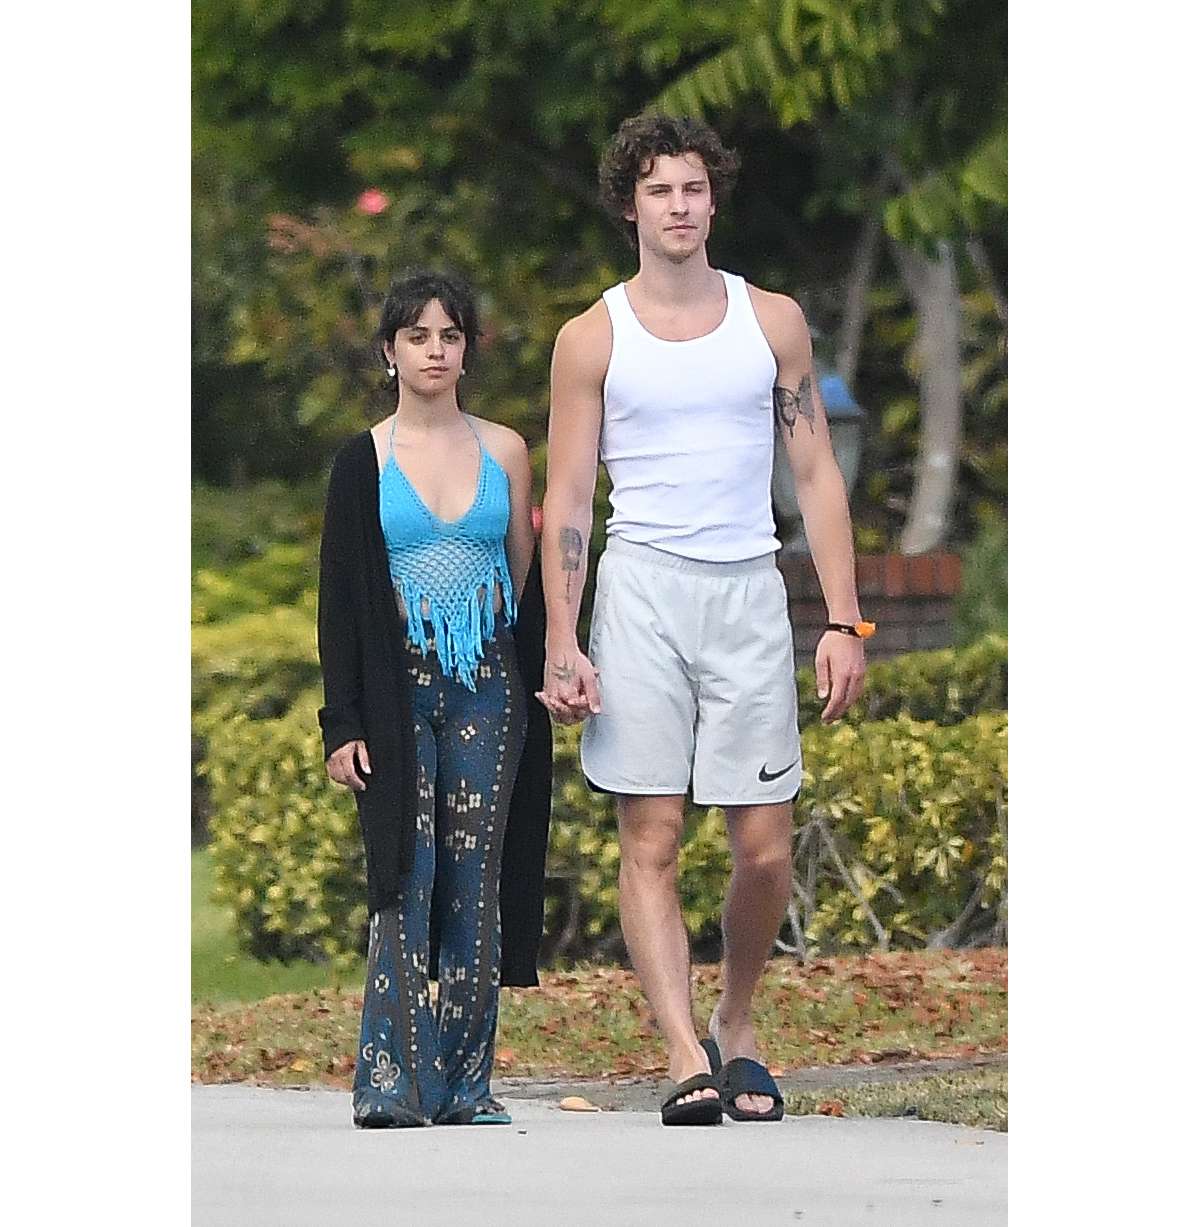 Camila Cabello And Shawn Mendes Seen Walking Together As They Self-quarantine In Miami, Florida